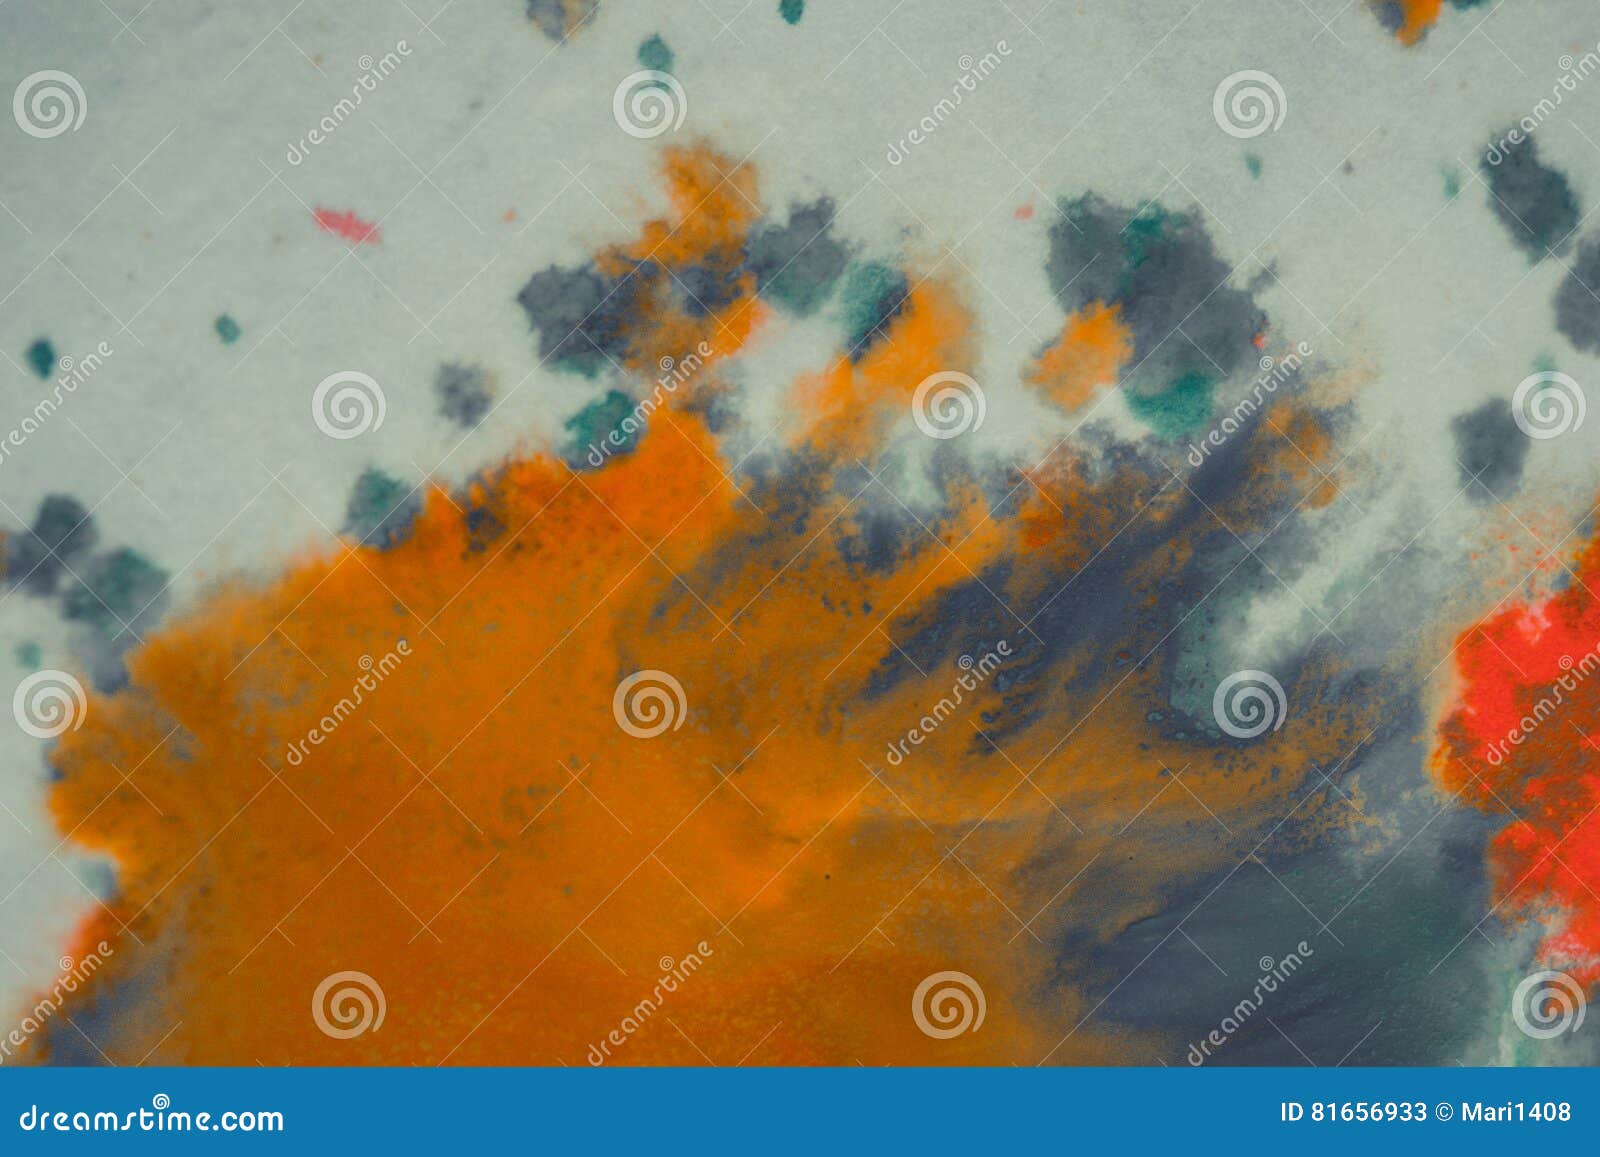 Overflowing Bright Orange And Dark Blue Paint On Paper Stock